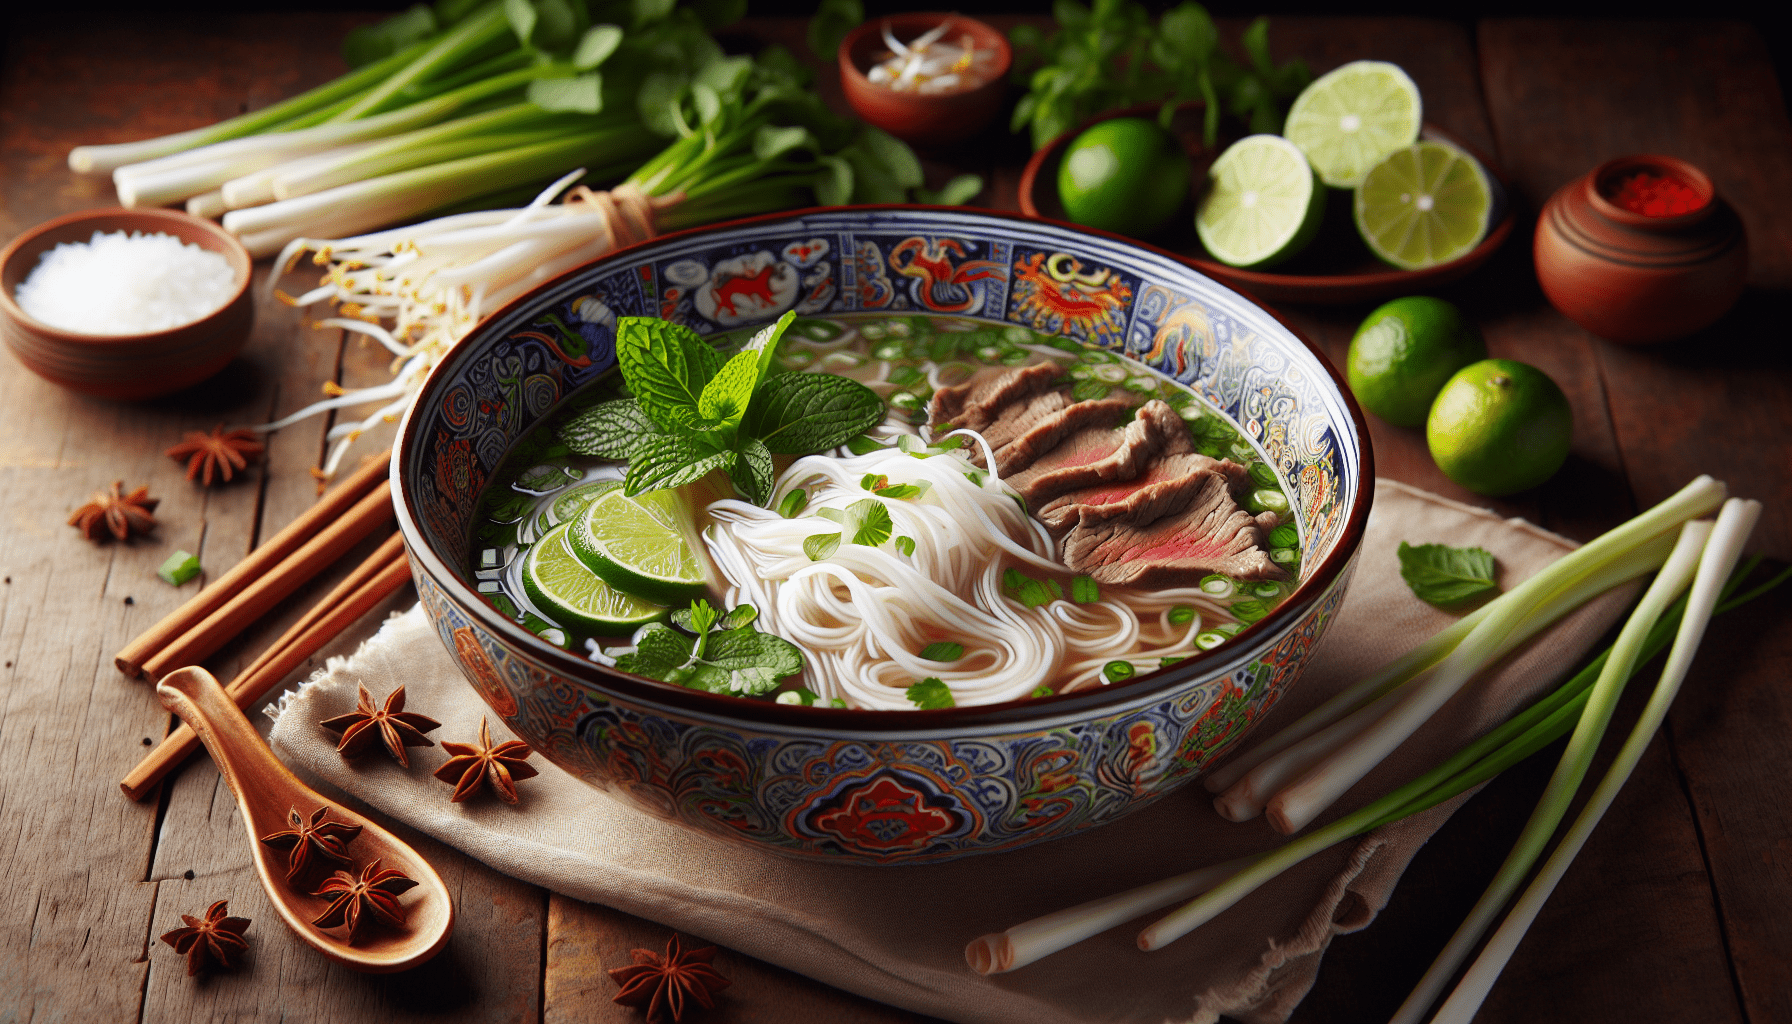 Whats Your Quick And Easy Vietnamese Recipe For A Fast And Delicious Lunch?